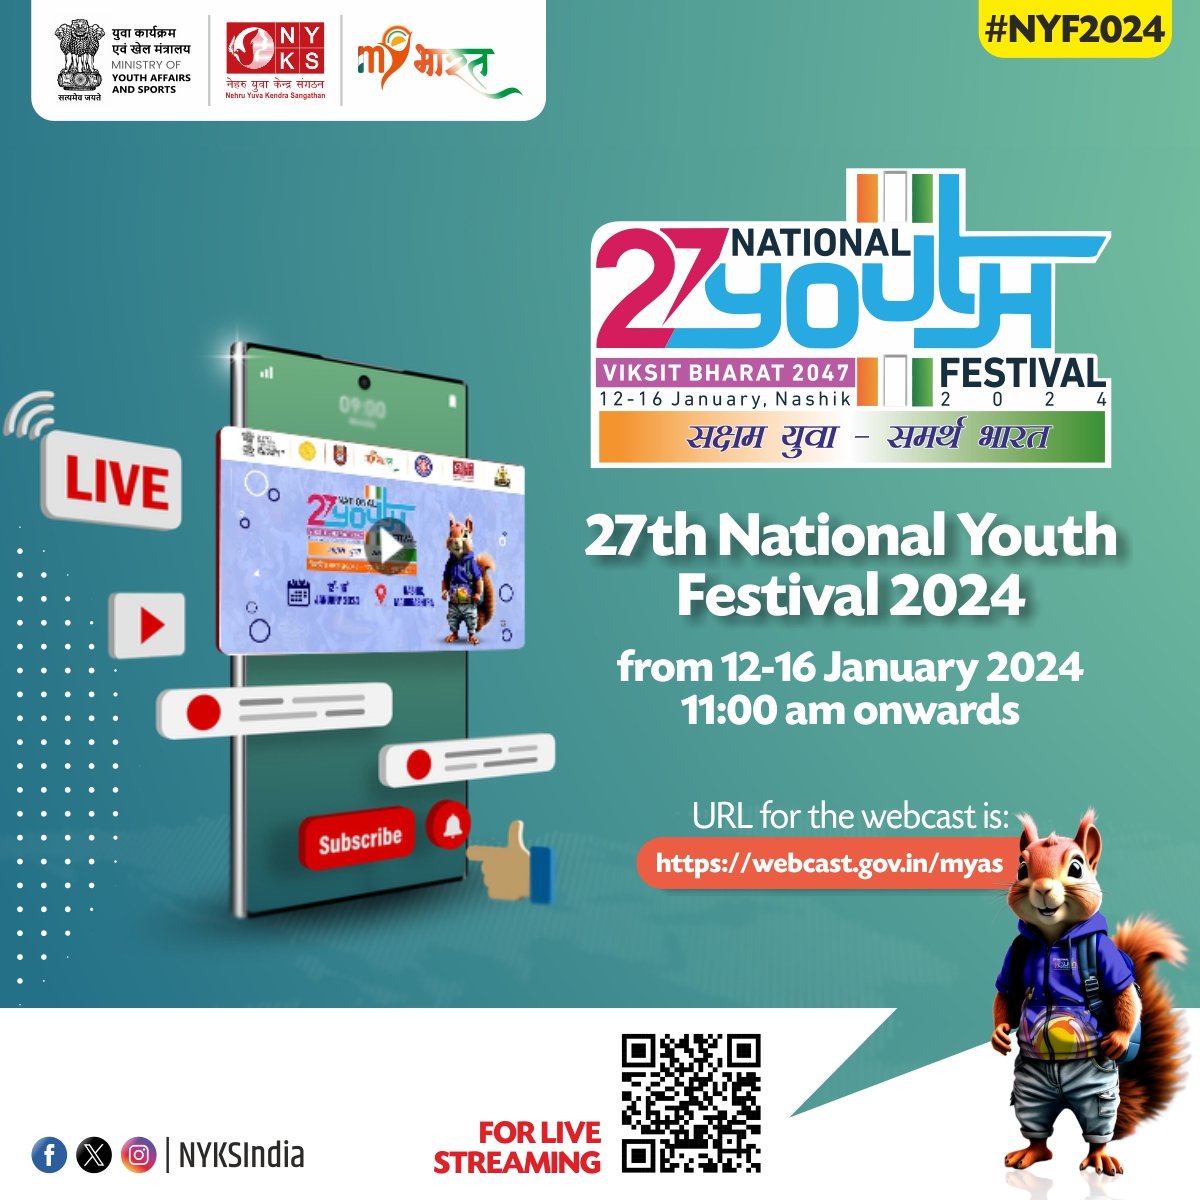 🌐🎥 Experience the energy and talent unfold as we live-stream the diverse events of the 27th #NationalYouthFestival2024. Your front-row seat to a celebration of youth brilliance! 

Scan the QR code to watch live.

#NYF2024 #LiveStreaming #YouthFestival #Nashik #Maharashtra